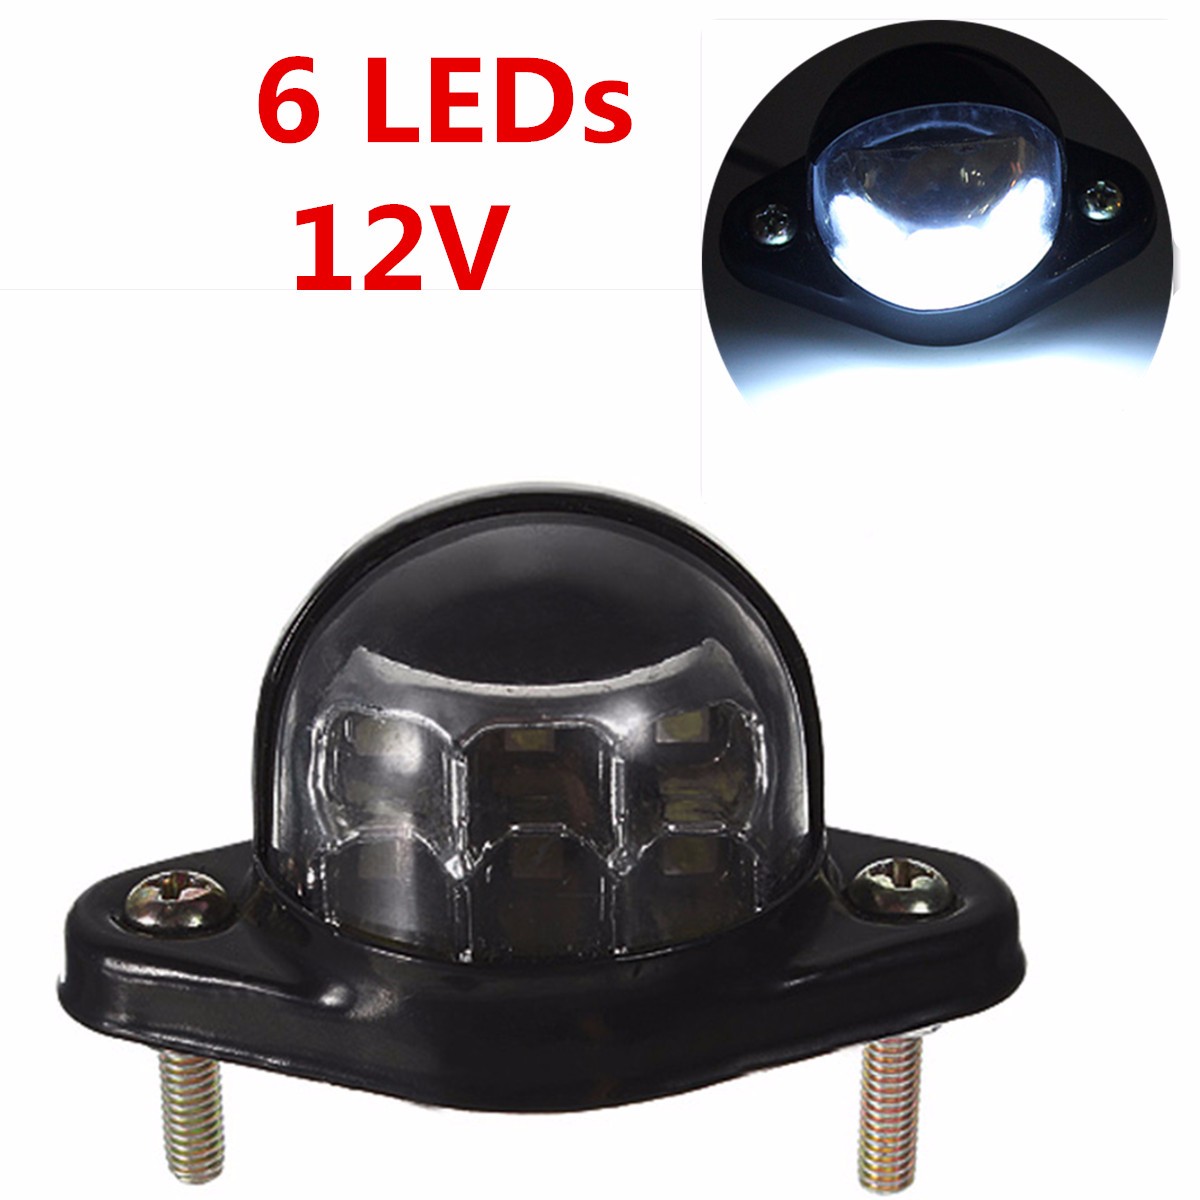 12V 6LED Car Number License Plate Light Rear Tail Lamp Trailer Truck Reflector Metal Shell Lorry Auto Lights